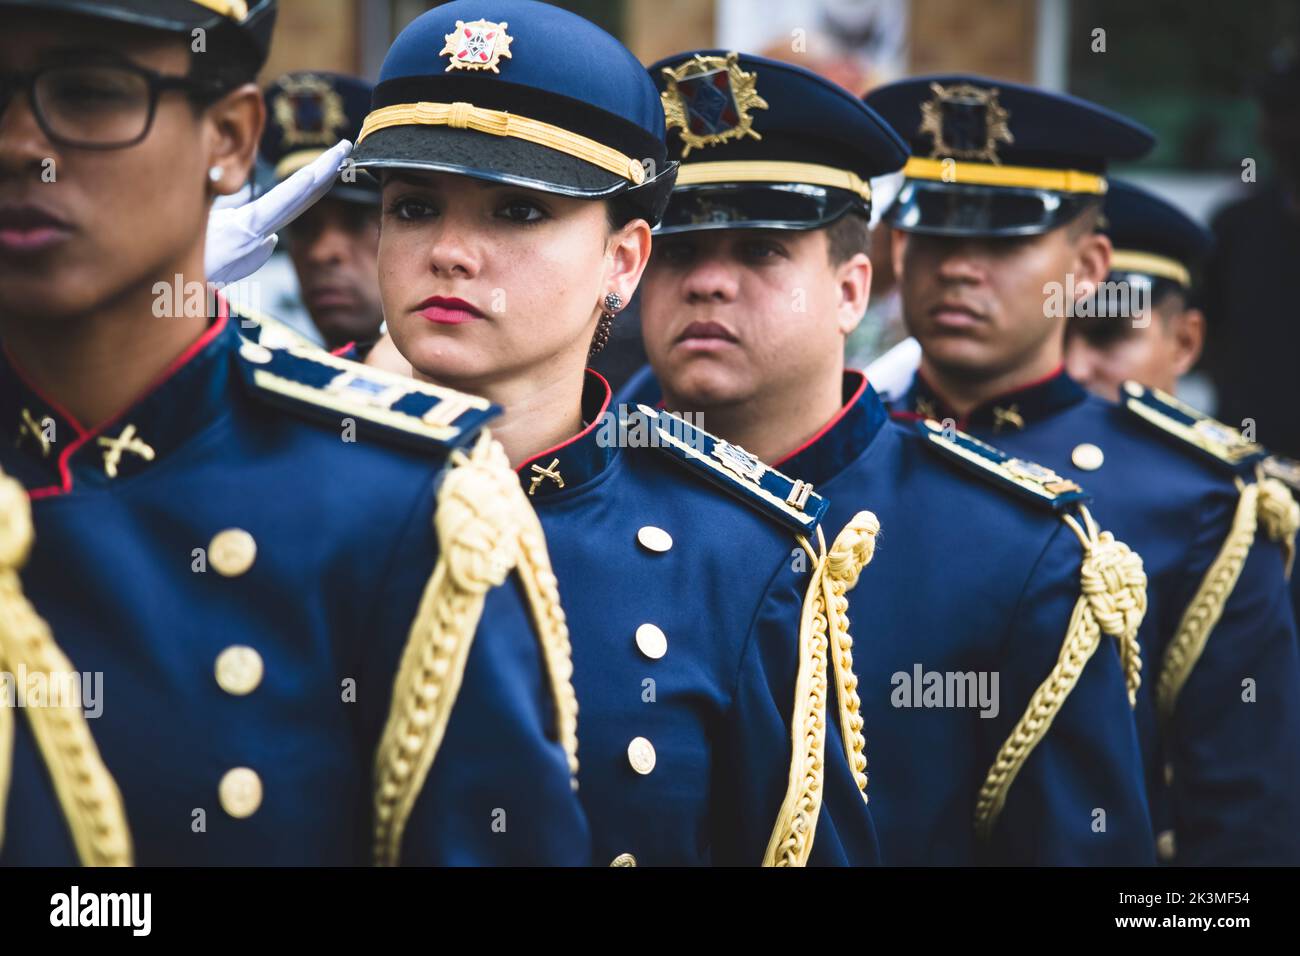 Salvador, Bahia, Brazil - September 7, 2016: Military personnel in formation during a military parade commemorating the independence of Brazil in the Stock Photo